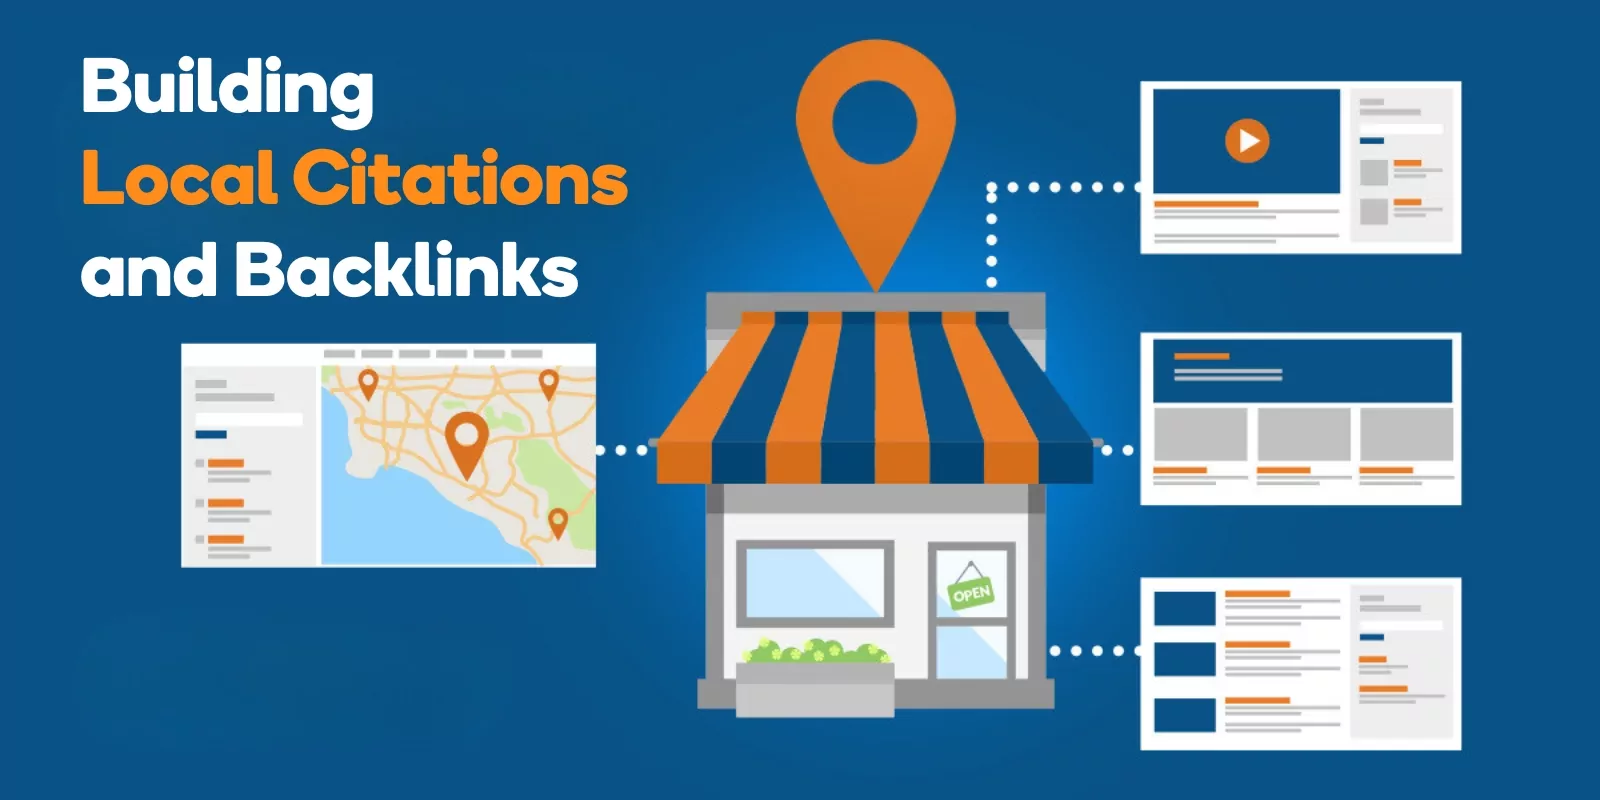 Building Local Citations and Backlinks